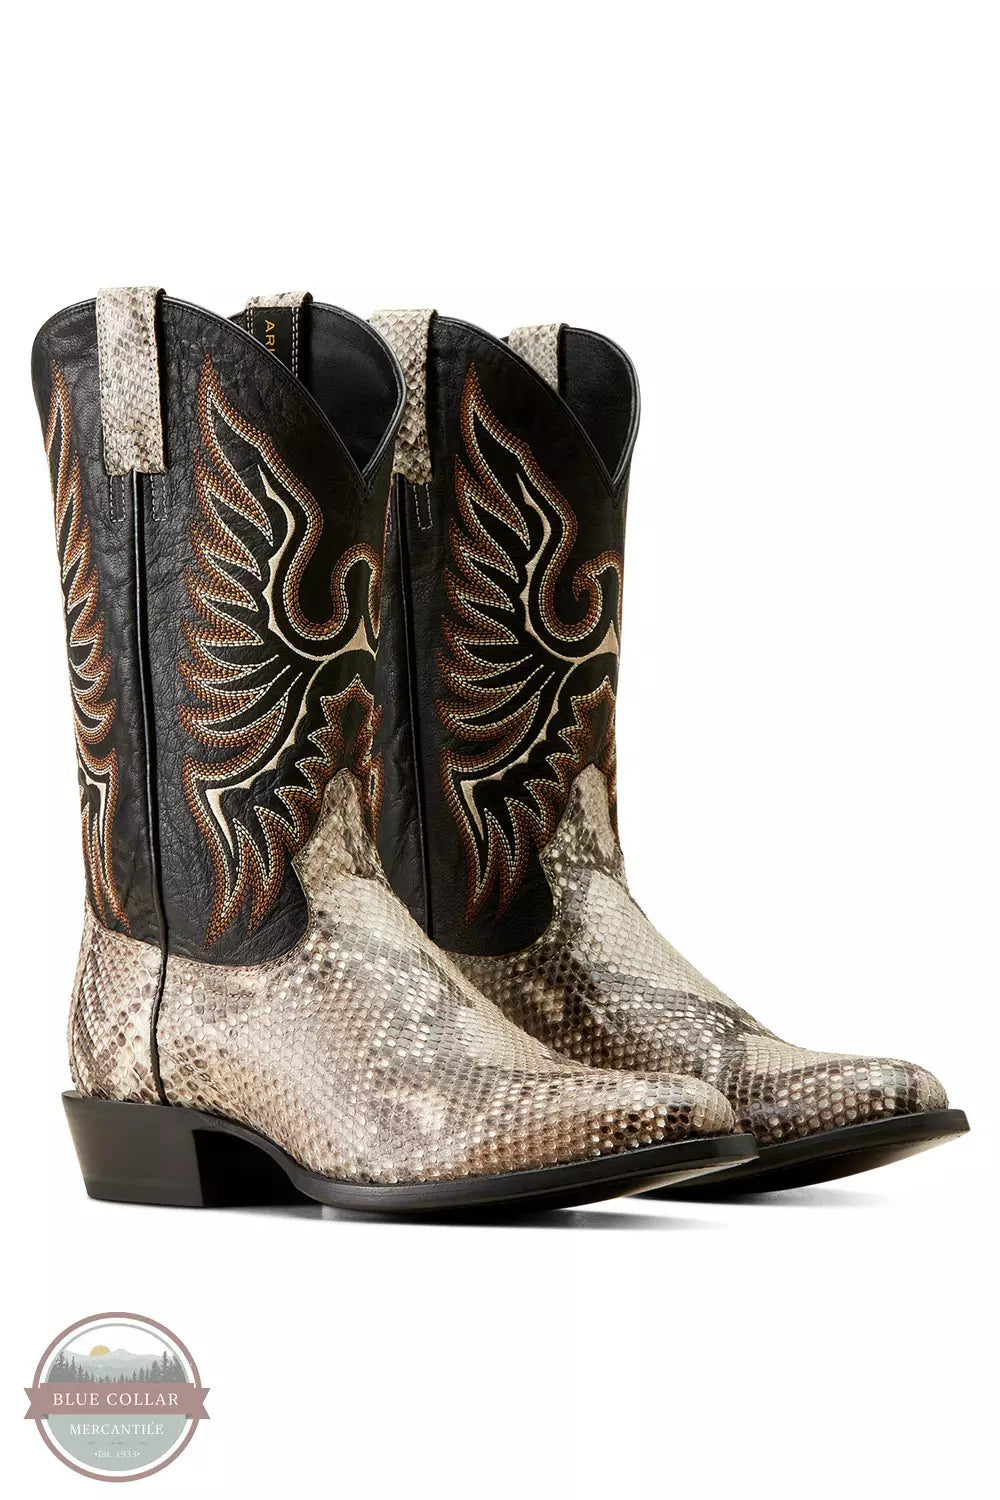 Ariat 10047082 Slick Cowboy Boot in Natural Python Pair Profile View